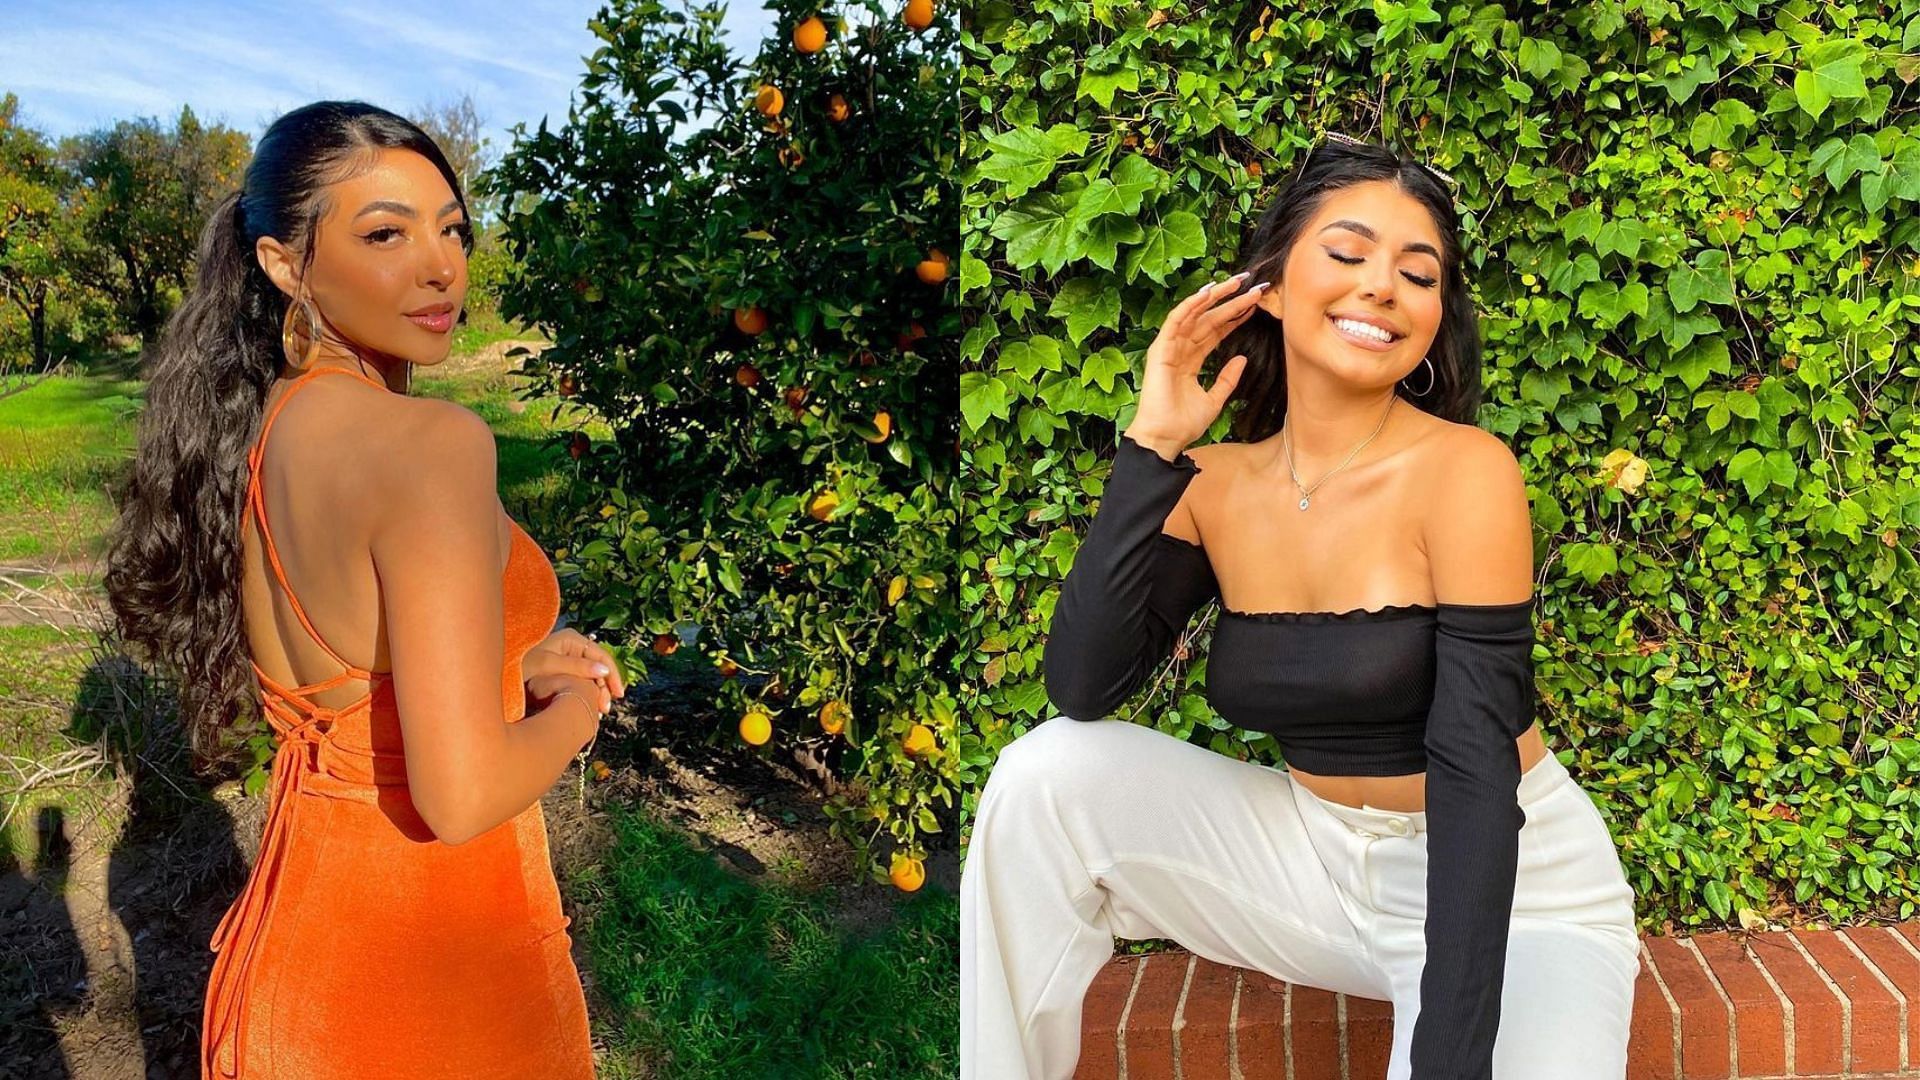 Johnnie Garcia and Kassy Castillo from Love Island USA (Images via Instagram/@johnnieolivia and @kass.c)